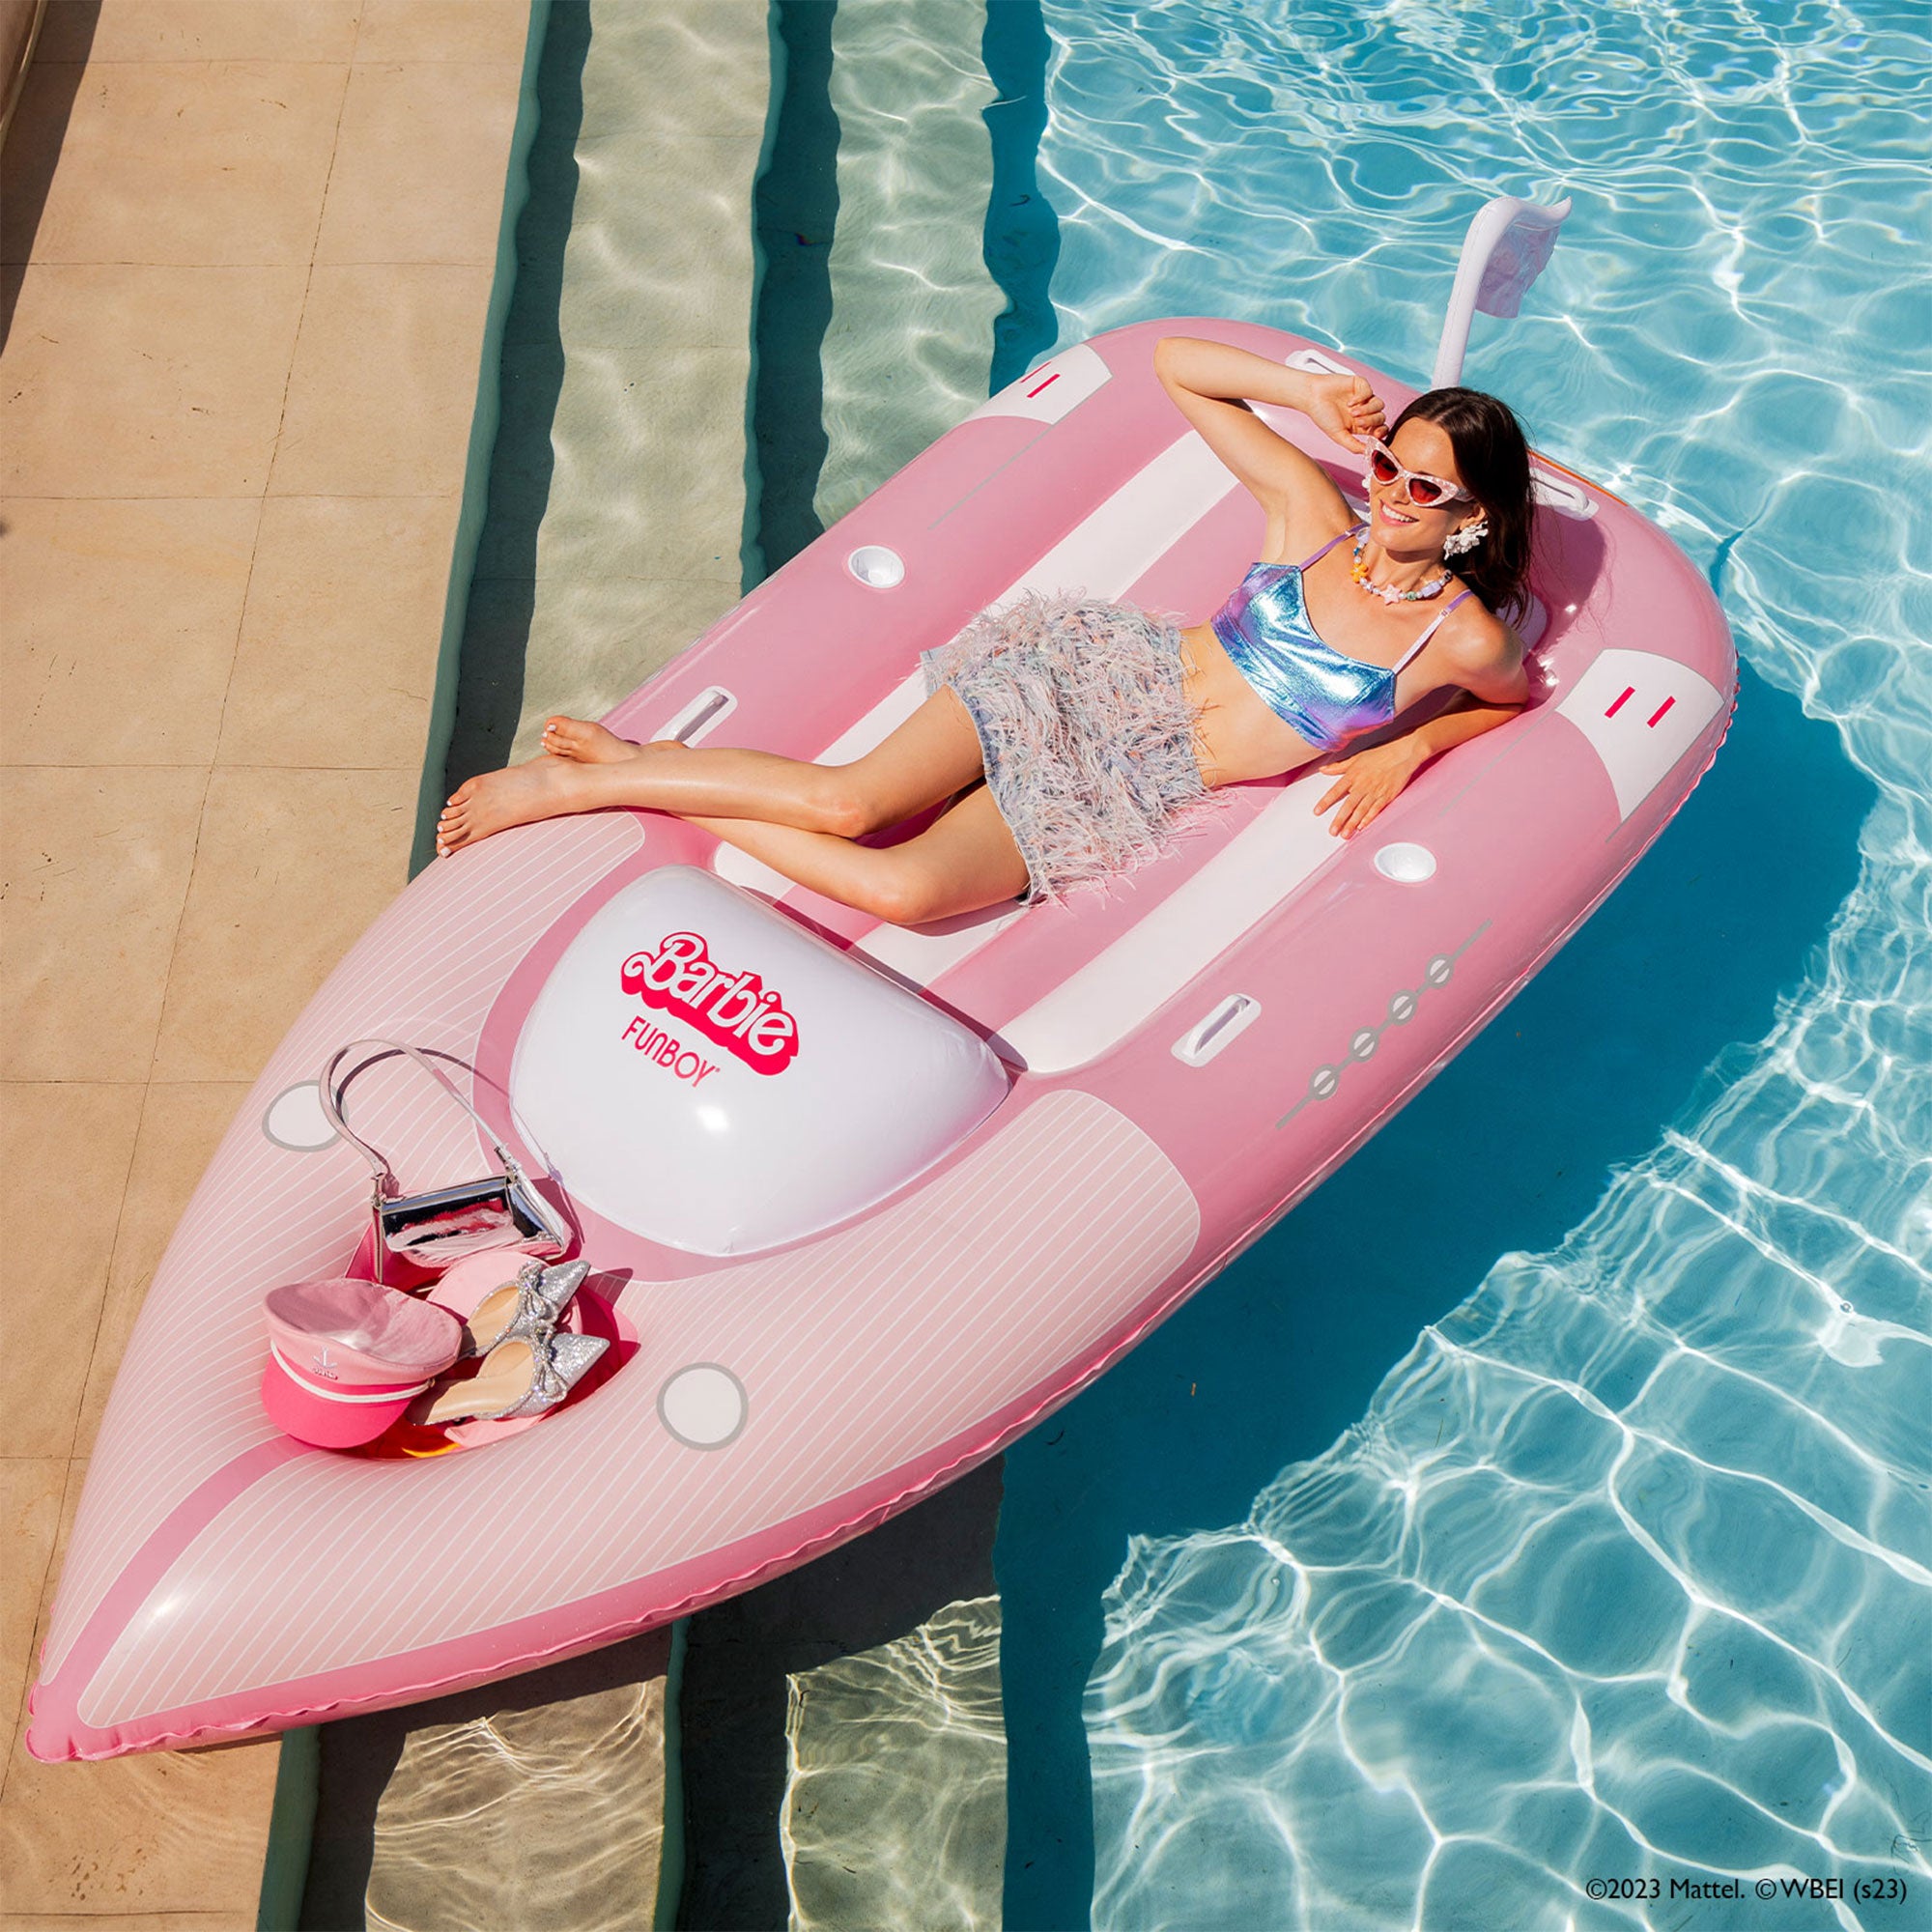 Barbie™ The Movie x FUNBOY Pool Float Collection - FUNBOY